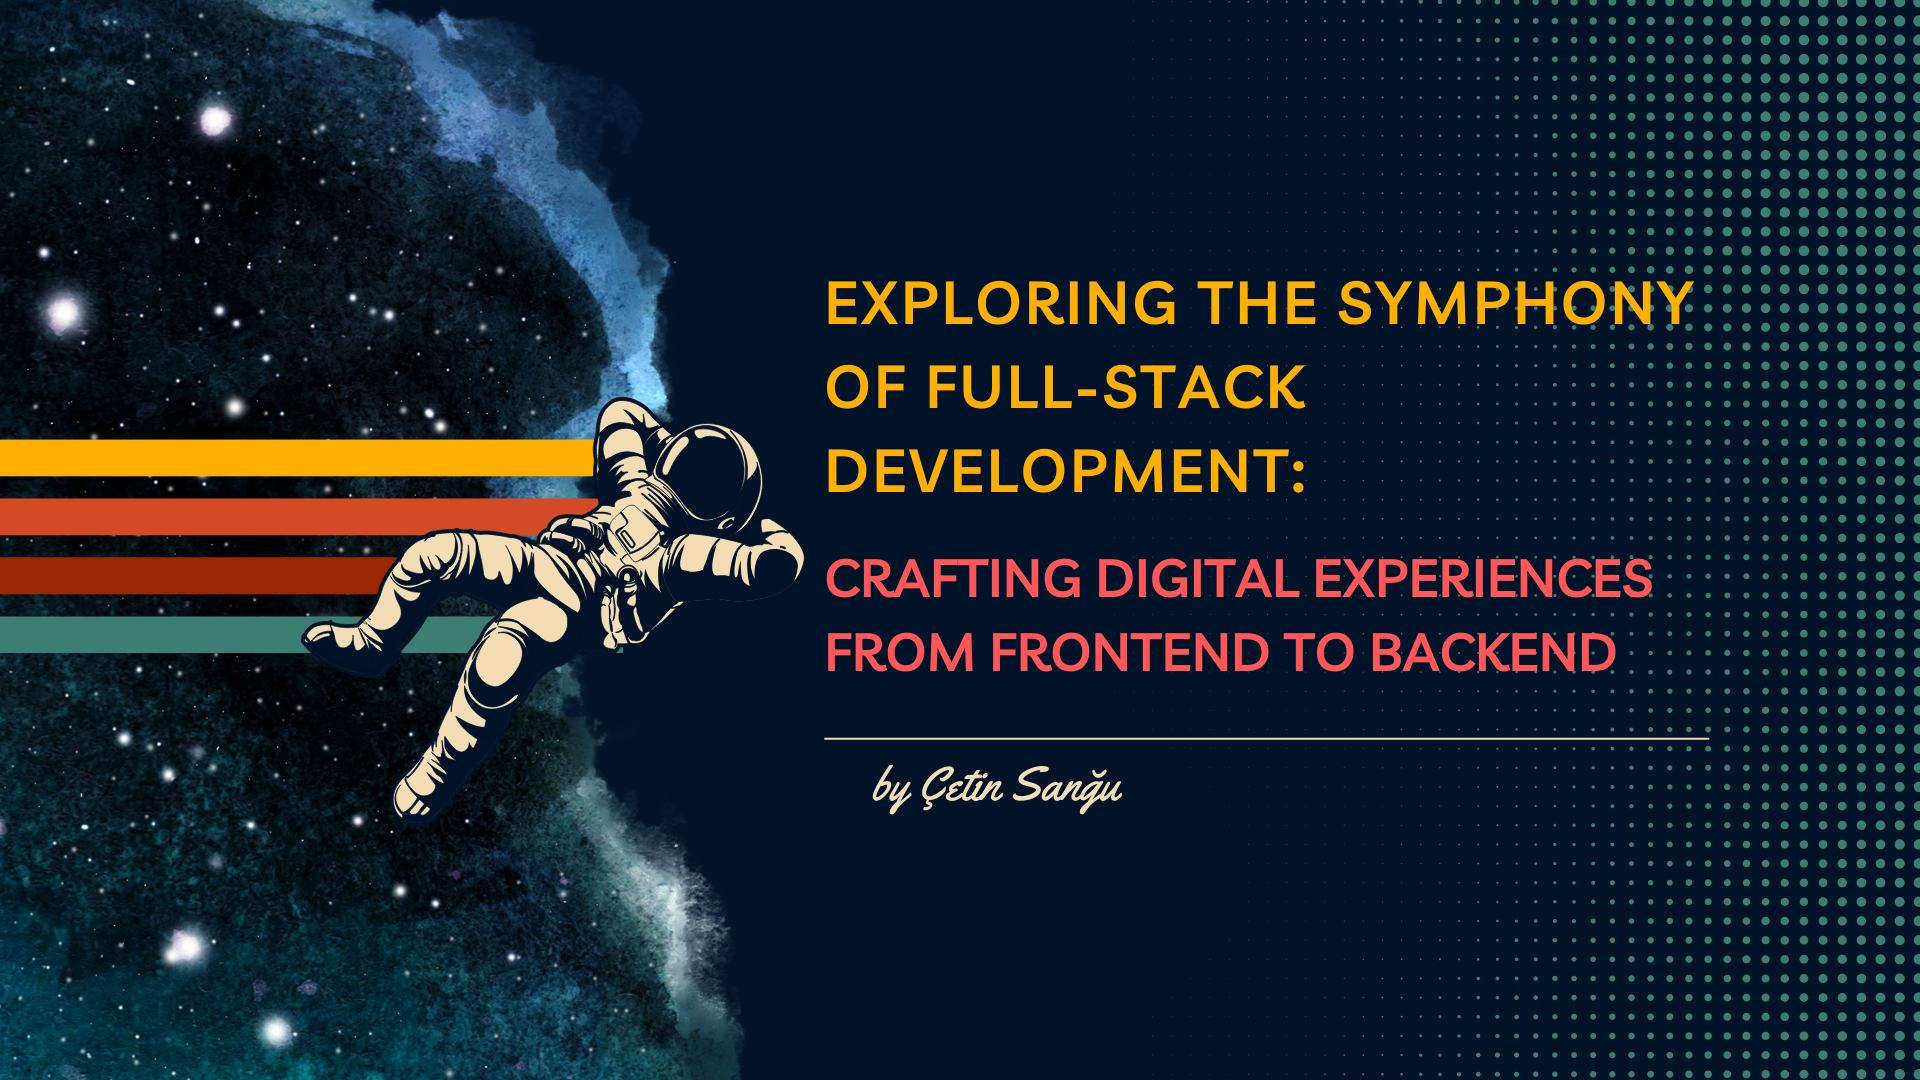 Exploring the Symphony of Full-Stack Development: Crafting Digital Experiences from Frontend to Backend